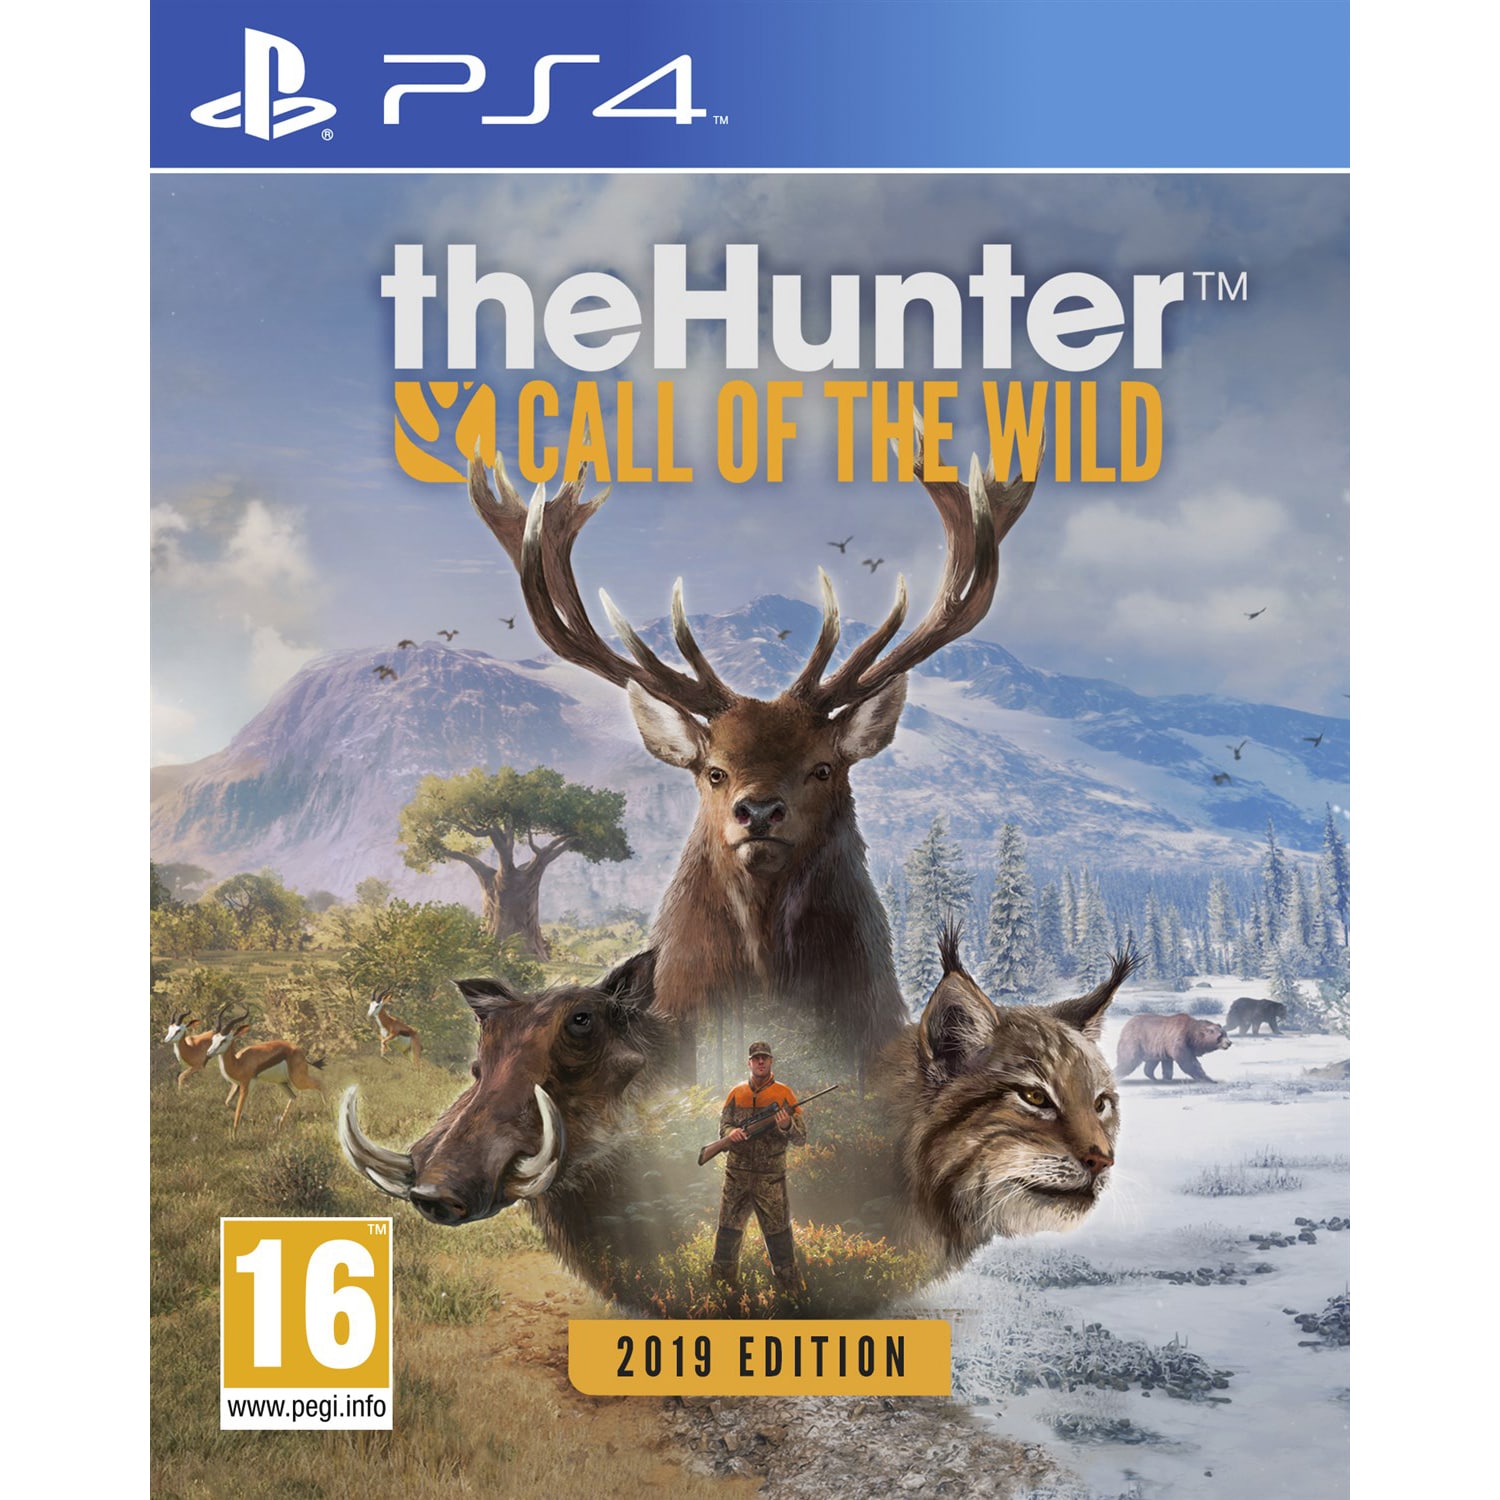 Call of the Wild (2019 edition) - PS4